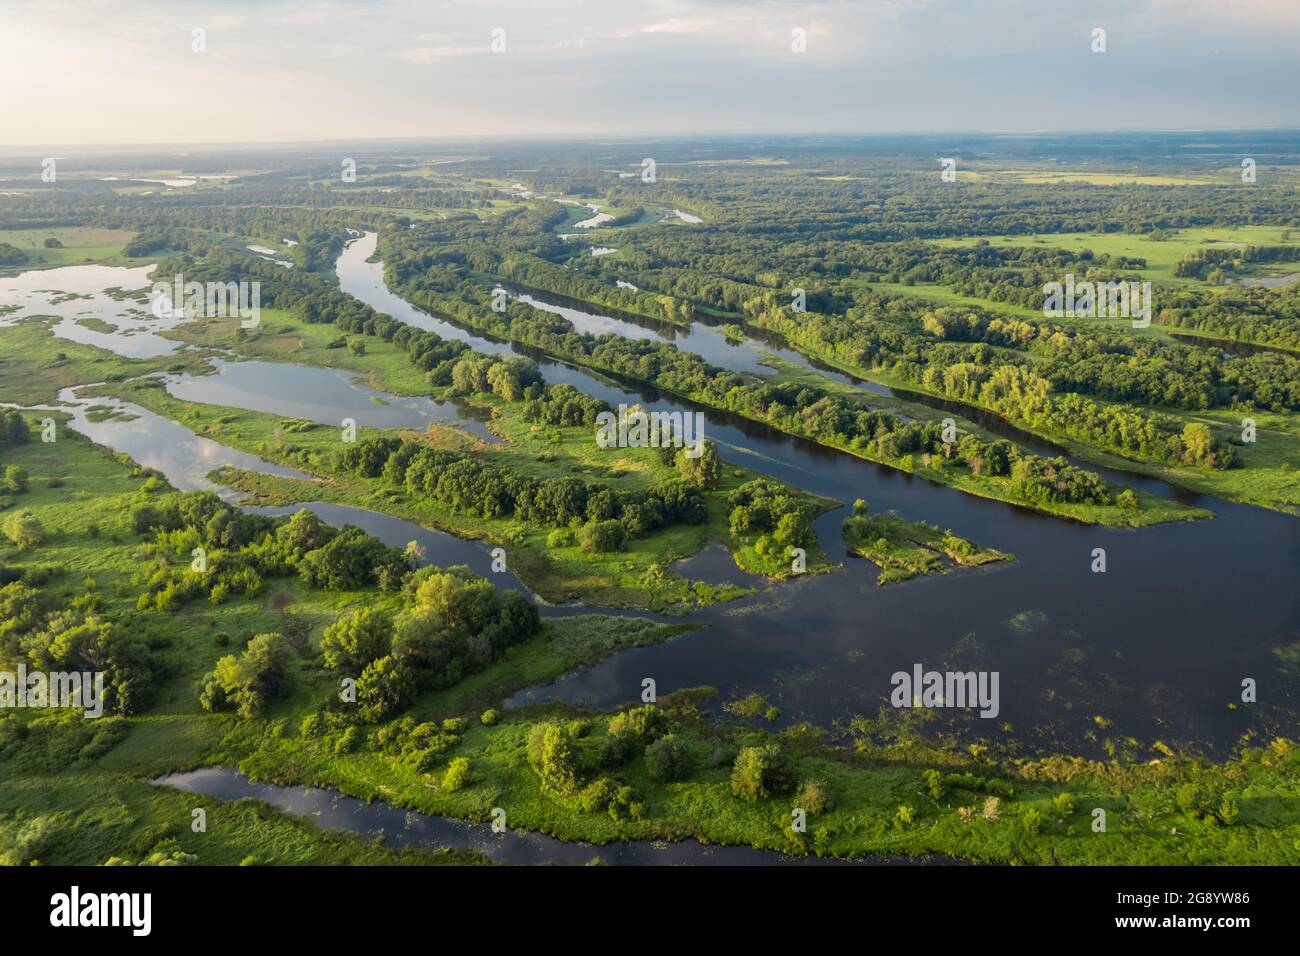 River land with islands, branch, girt with fishing boats and camps, aerial view Stock Photo